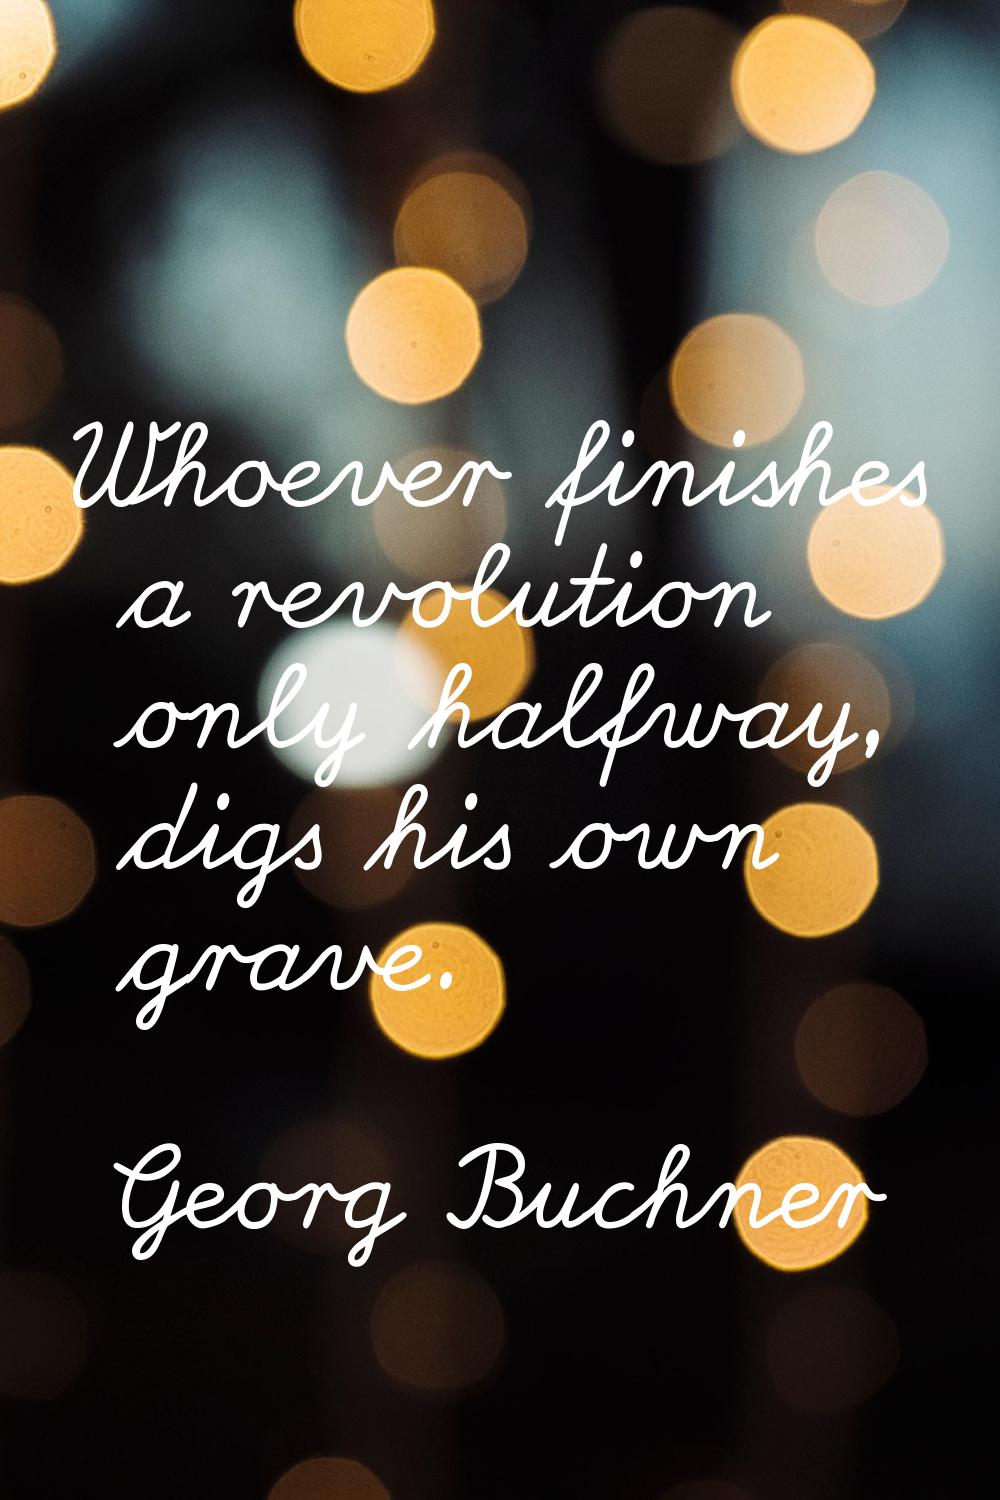 Whoever finishes a revolution only halfway, digs his own grave.